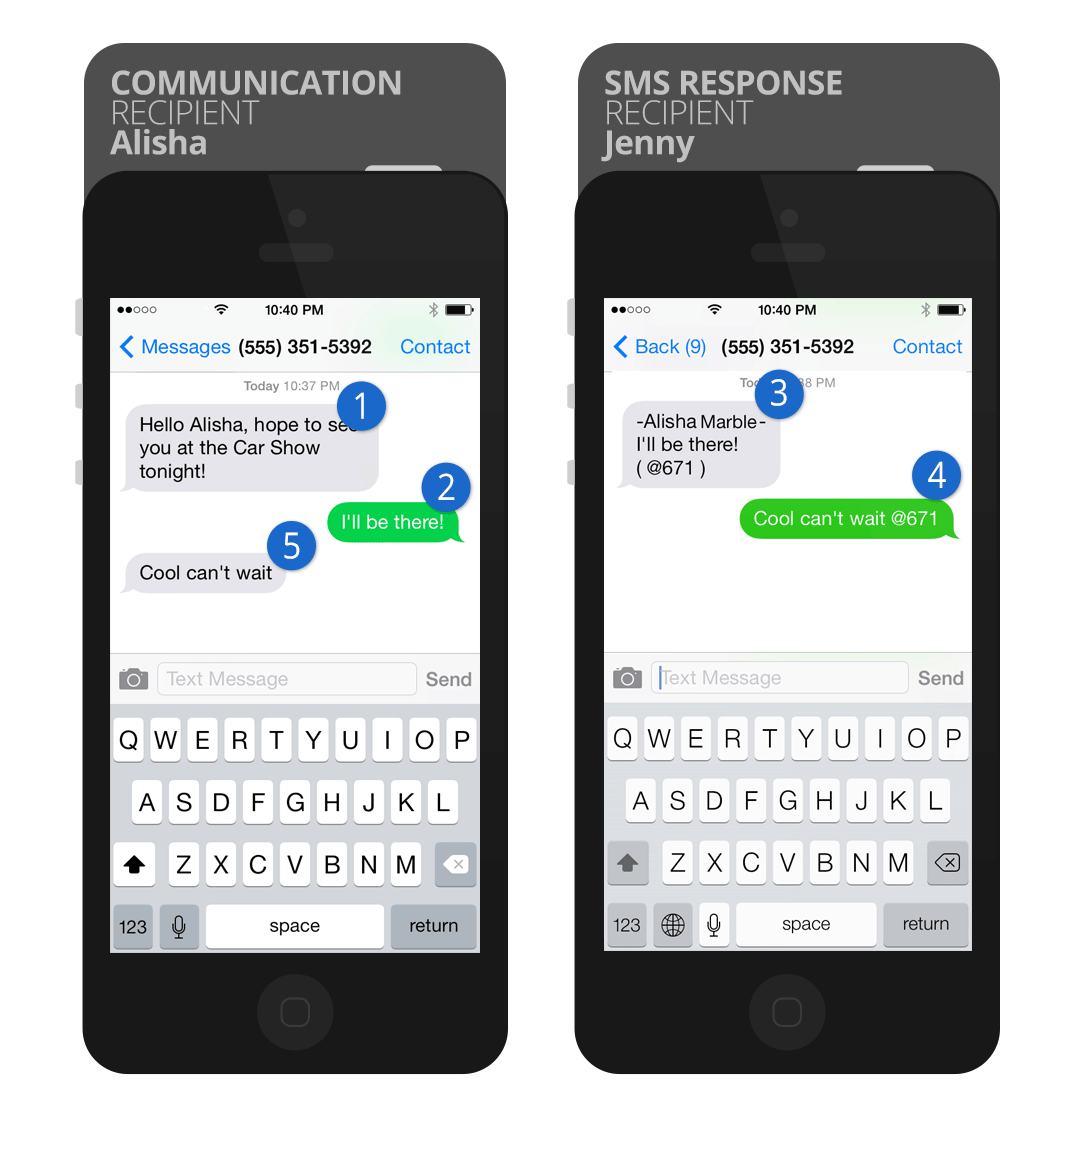 SMS Example